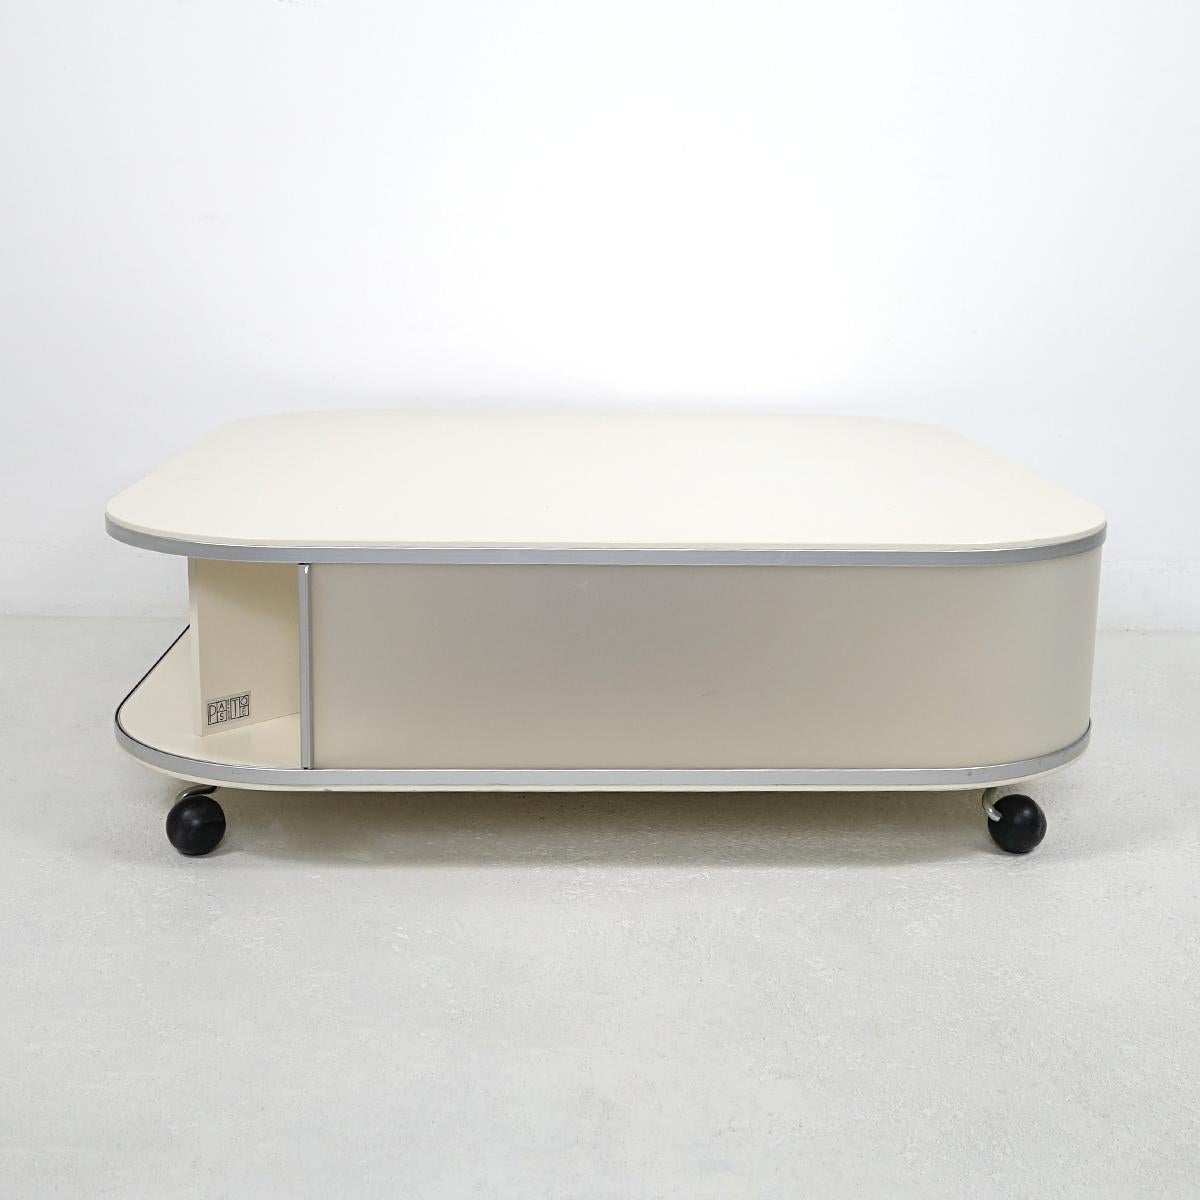 Dutch Rare 1980s Modern Off-White Square Coffee Table with Storage by Pastoe